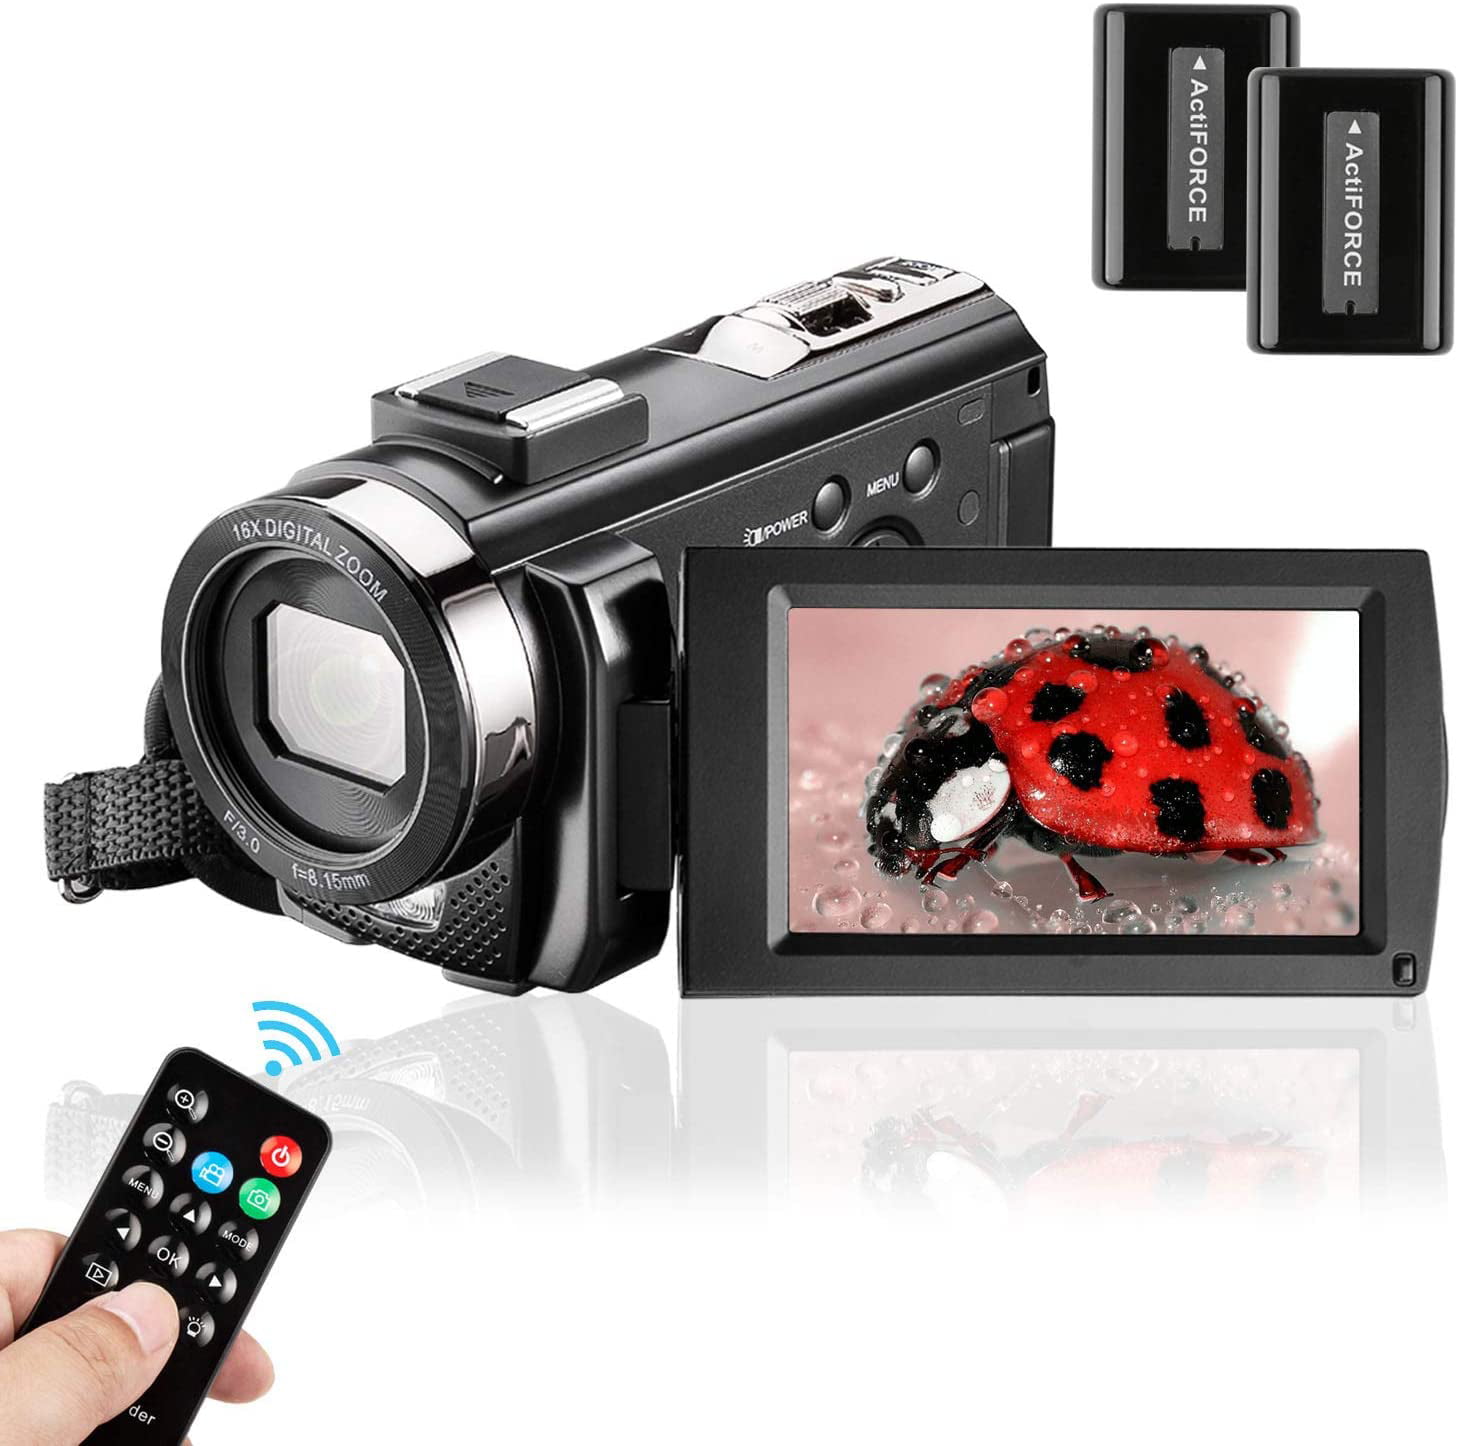 Camcorder Video Camera Full HD Digital Camera 1080P 24.0MP Vlogging Camera Night Vision Pause Function with Remote Controller 